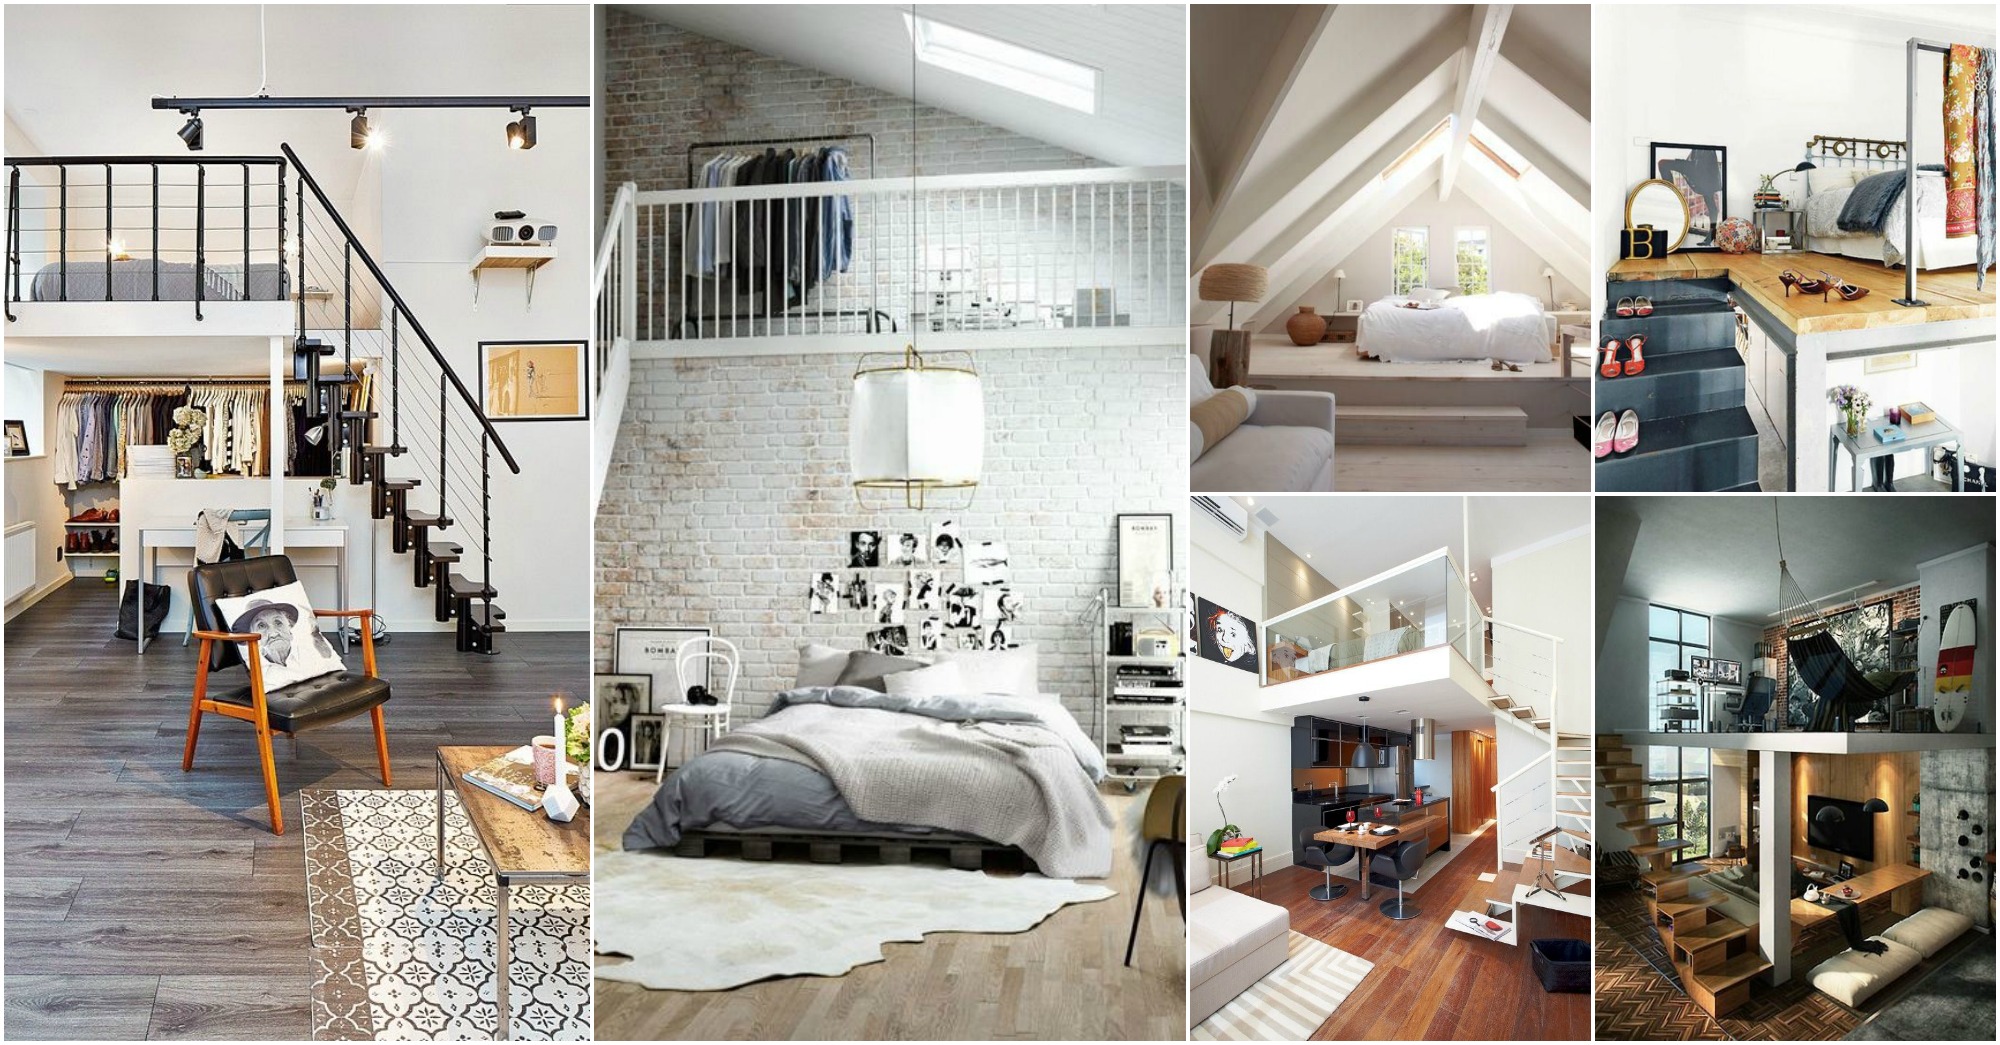 Chic Loft Bedroom Decor Ideas That Will Catch Your Eye